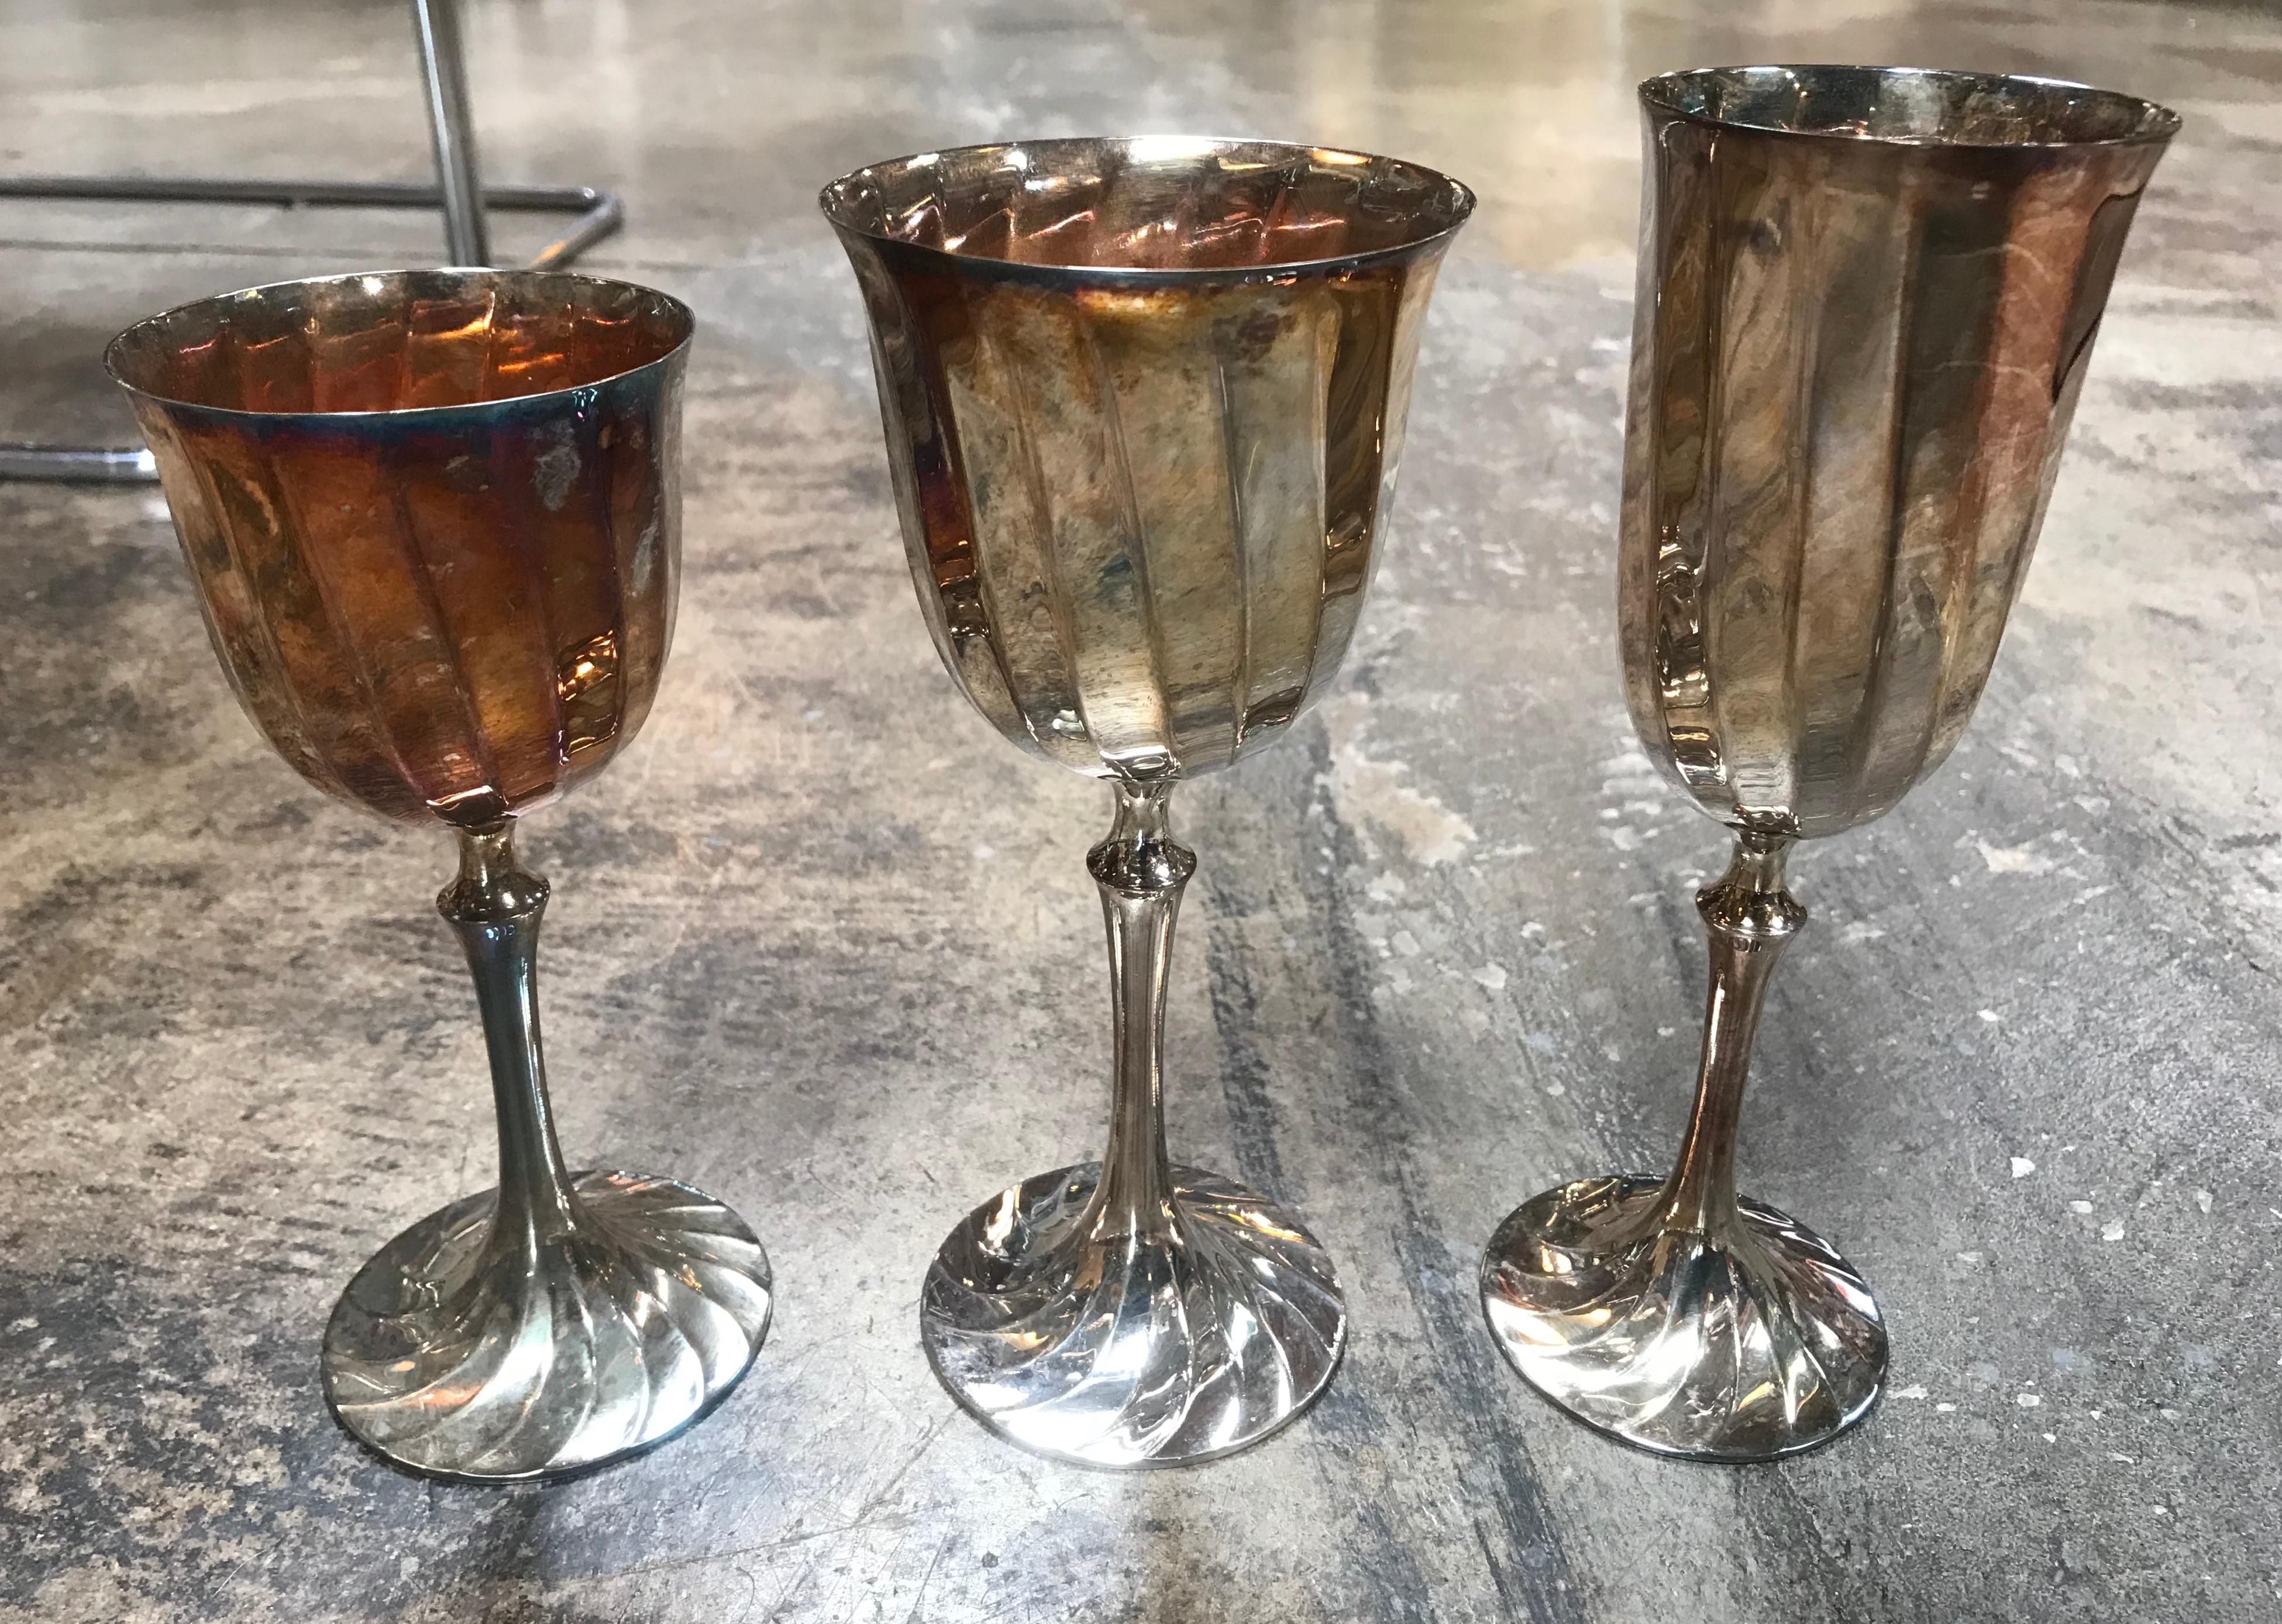 Mid-Century Modern Midcentury Glassware Set for 10 Silver-Plated Glasses, Italy, 1950s